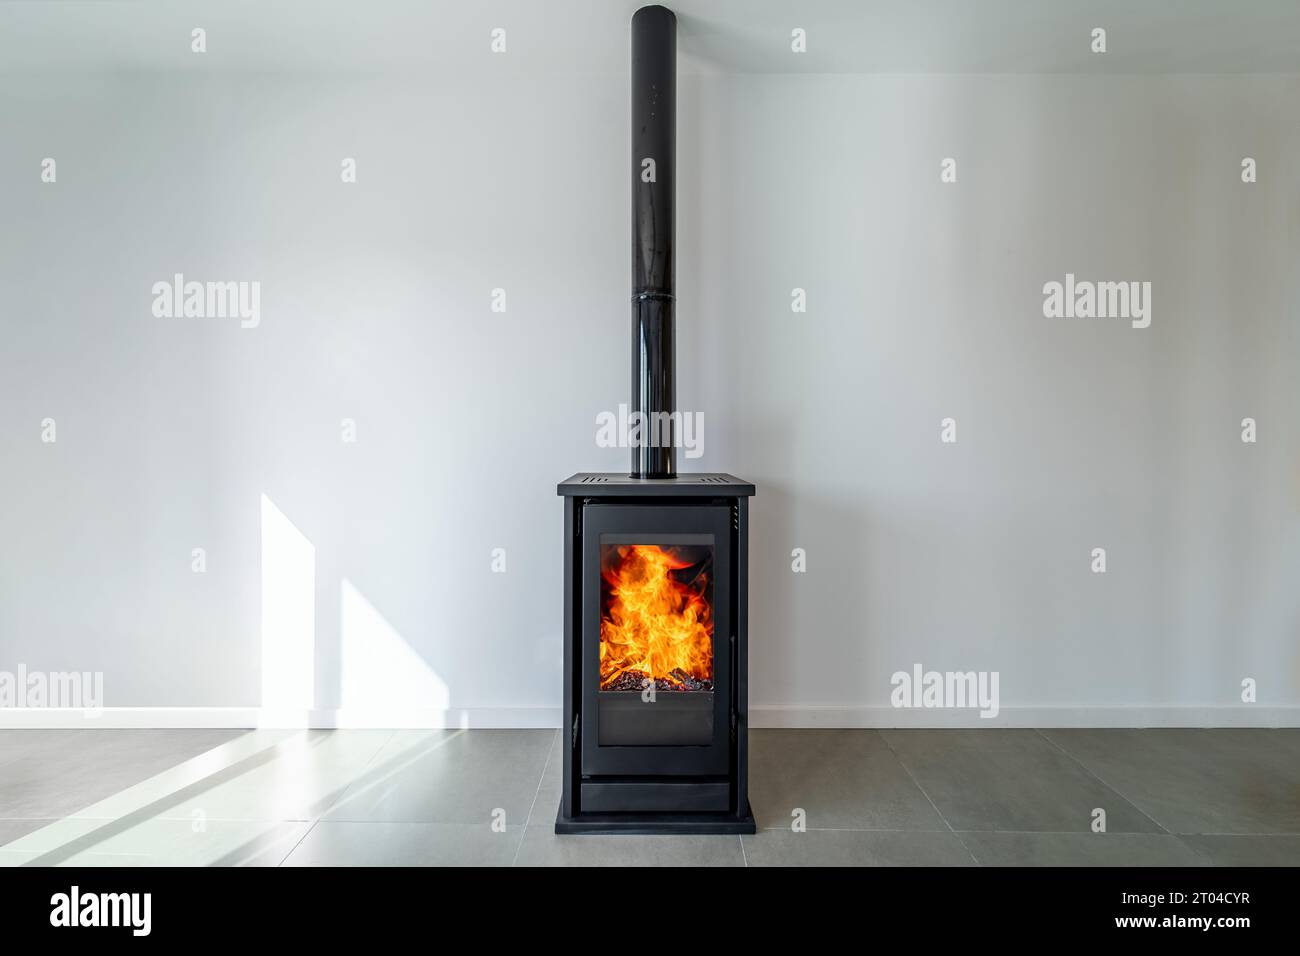 Fireplace inside house modern living room. Cosy living room with wood burner stove with burning flame behind a glass door Stock Photo